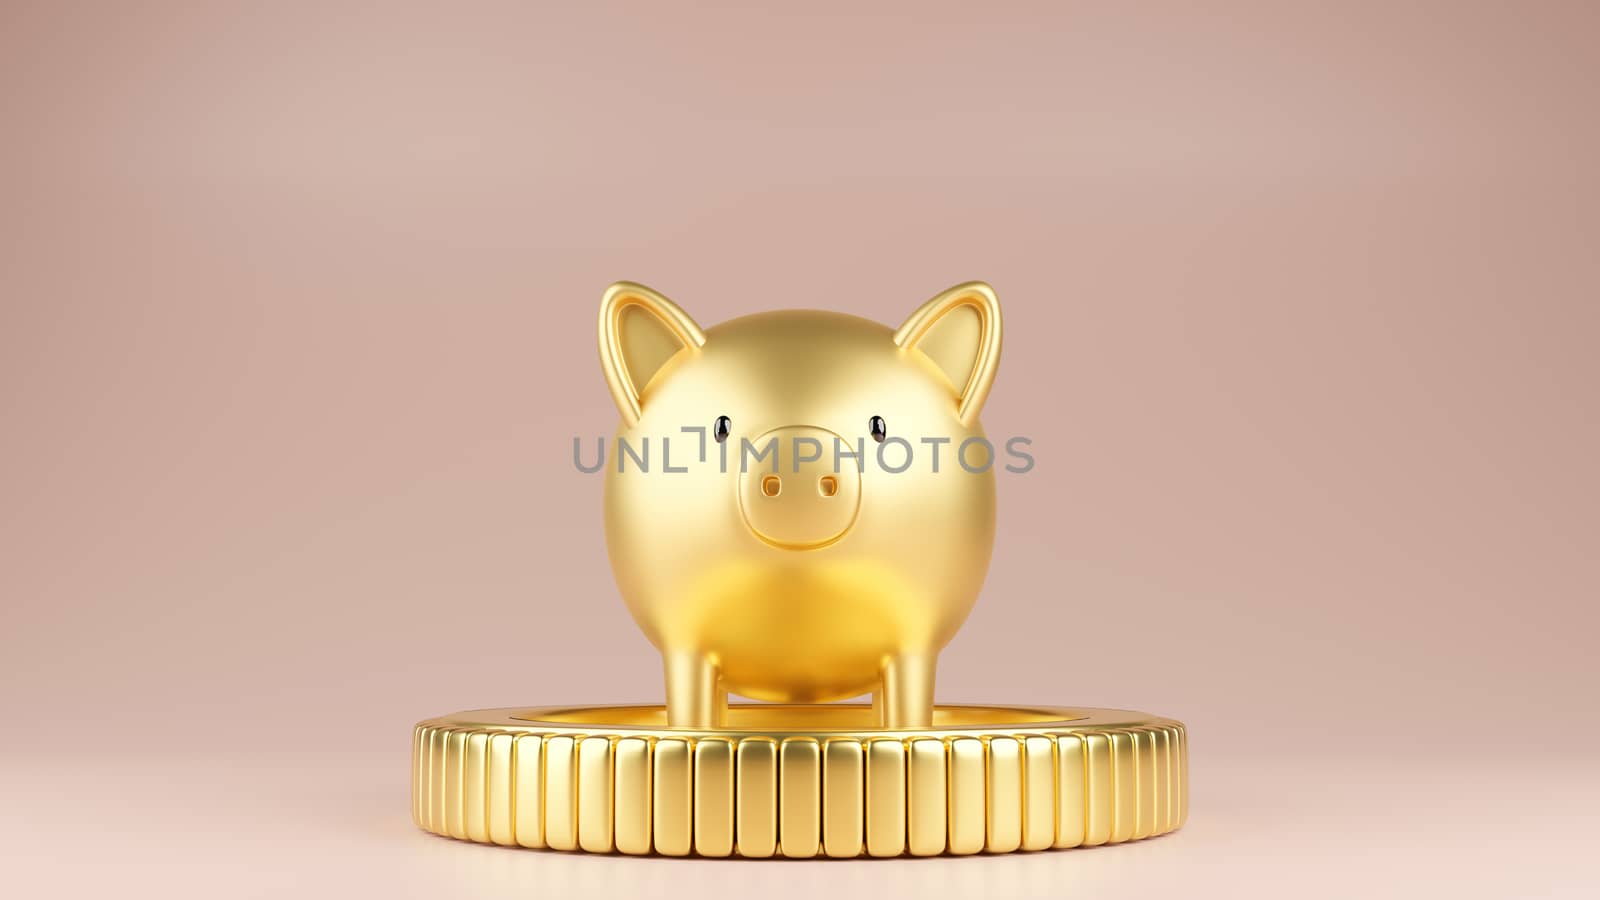 3d rendered illustration of a gold piggy bank standing on a large gold coin. Pastel old rose color background. Business and finance concept.